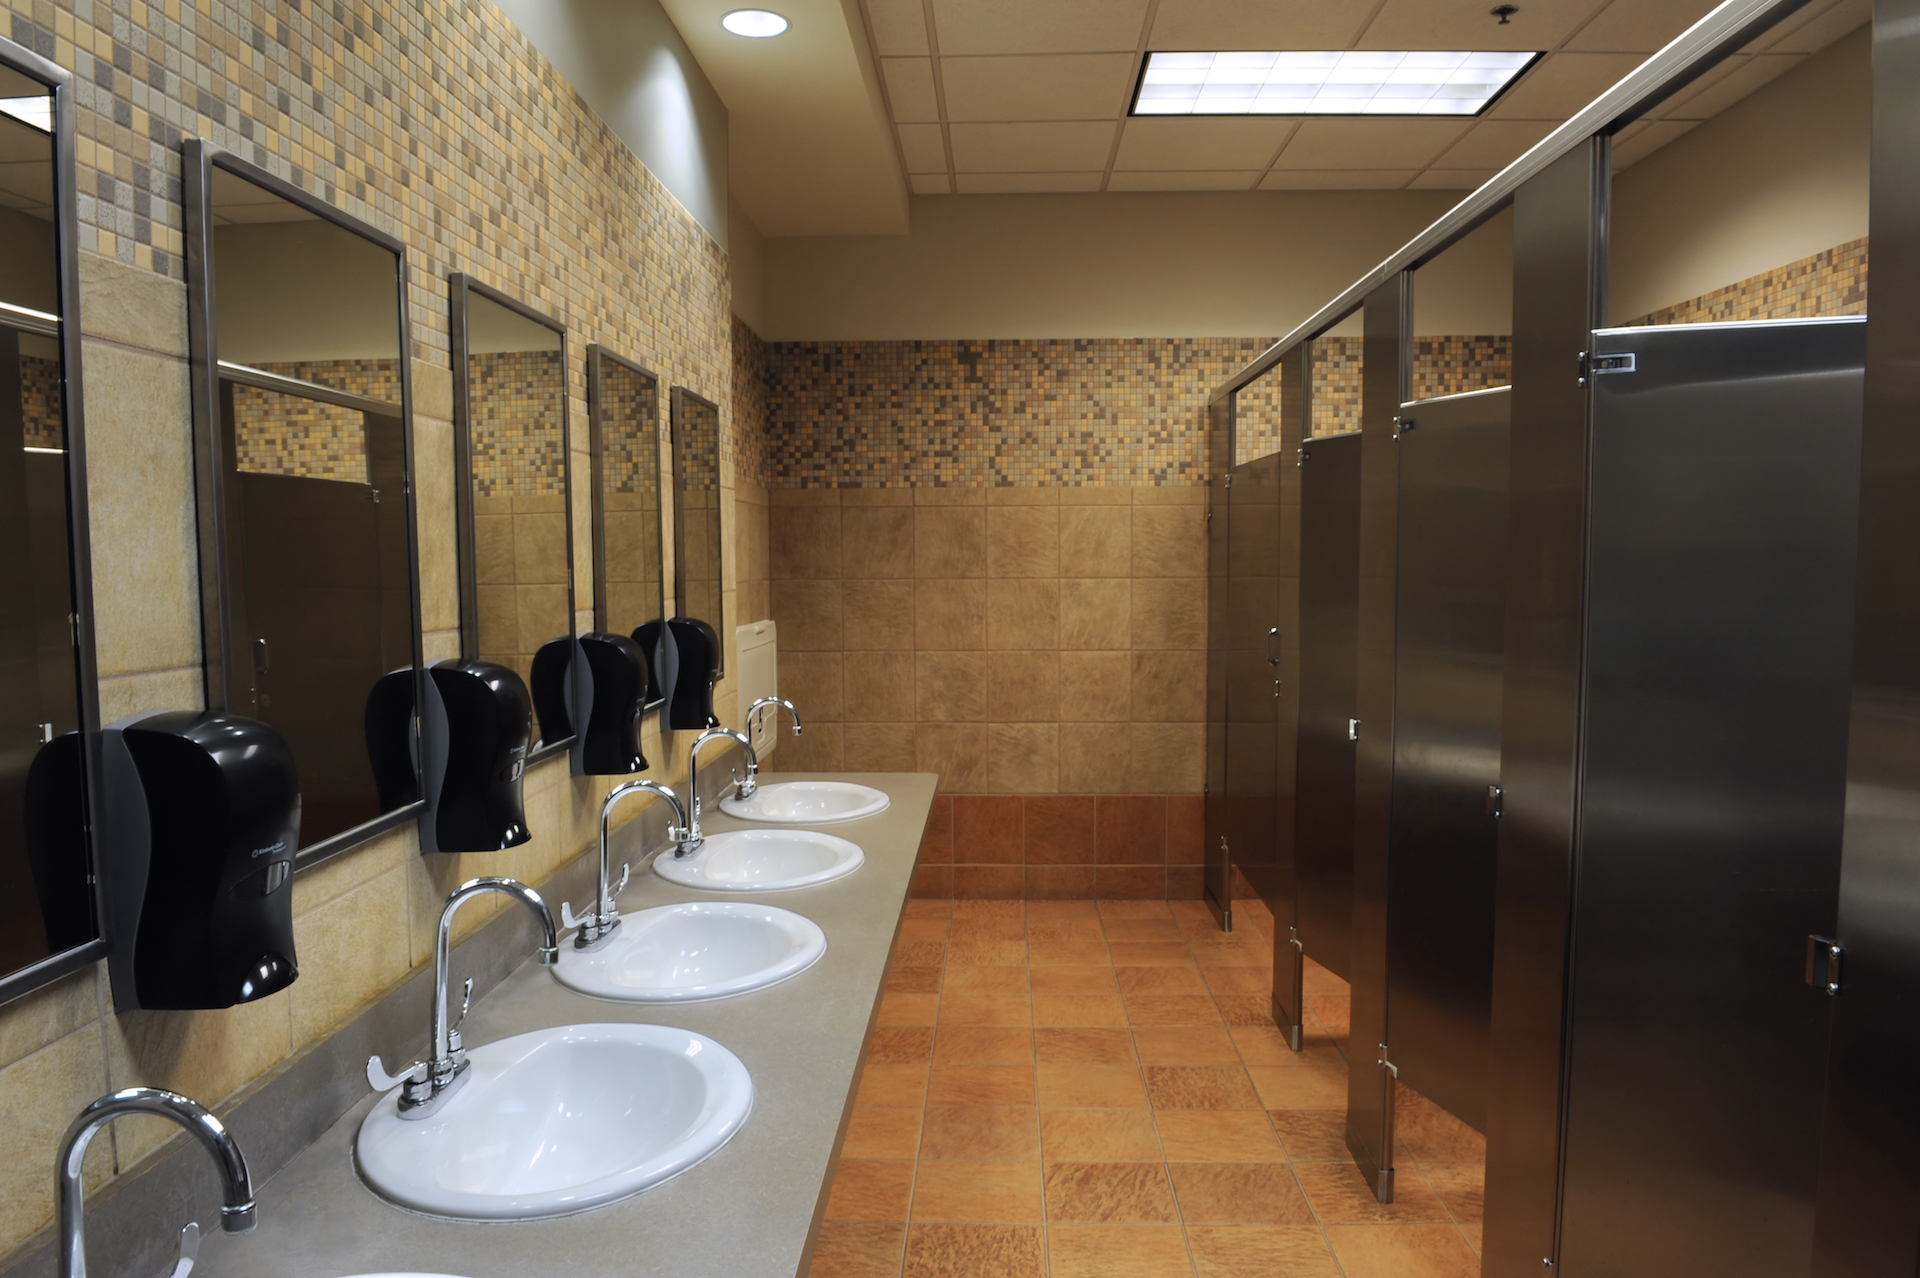 Commercial Restroom Cleaning Services